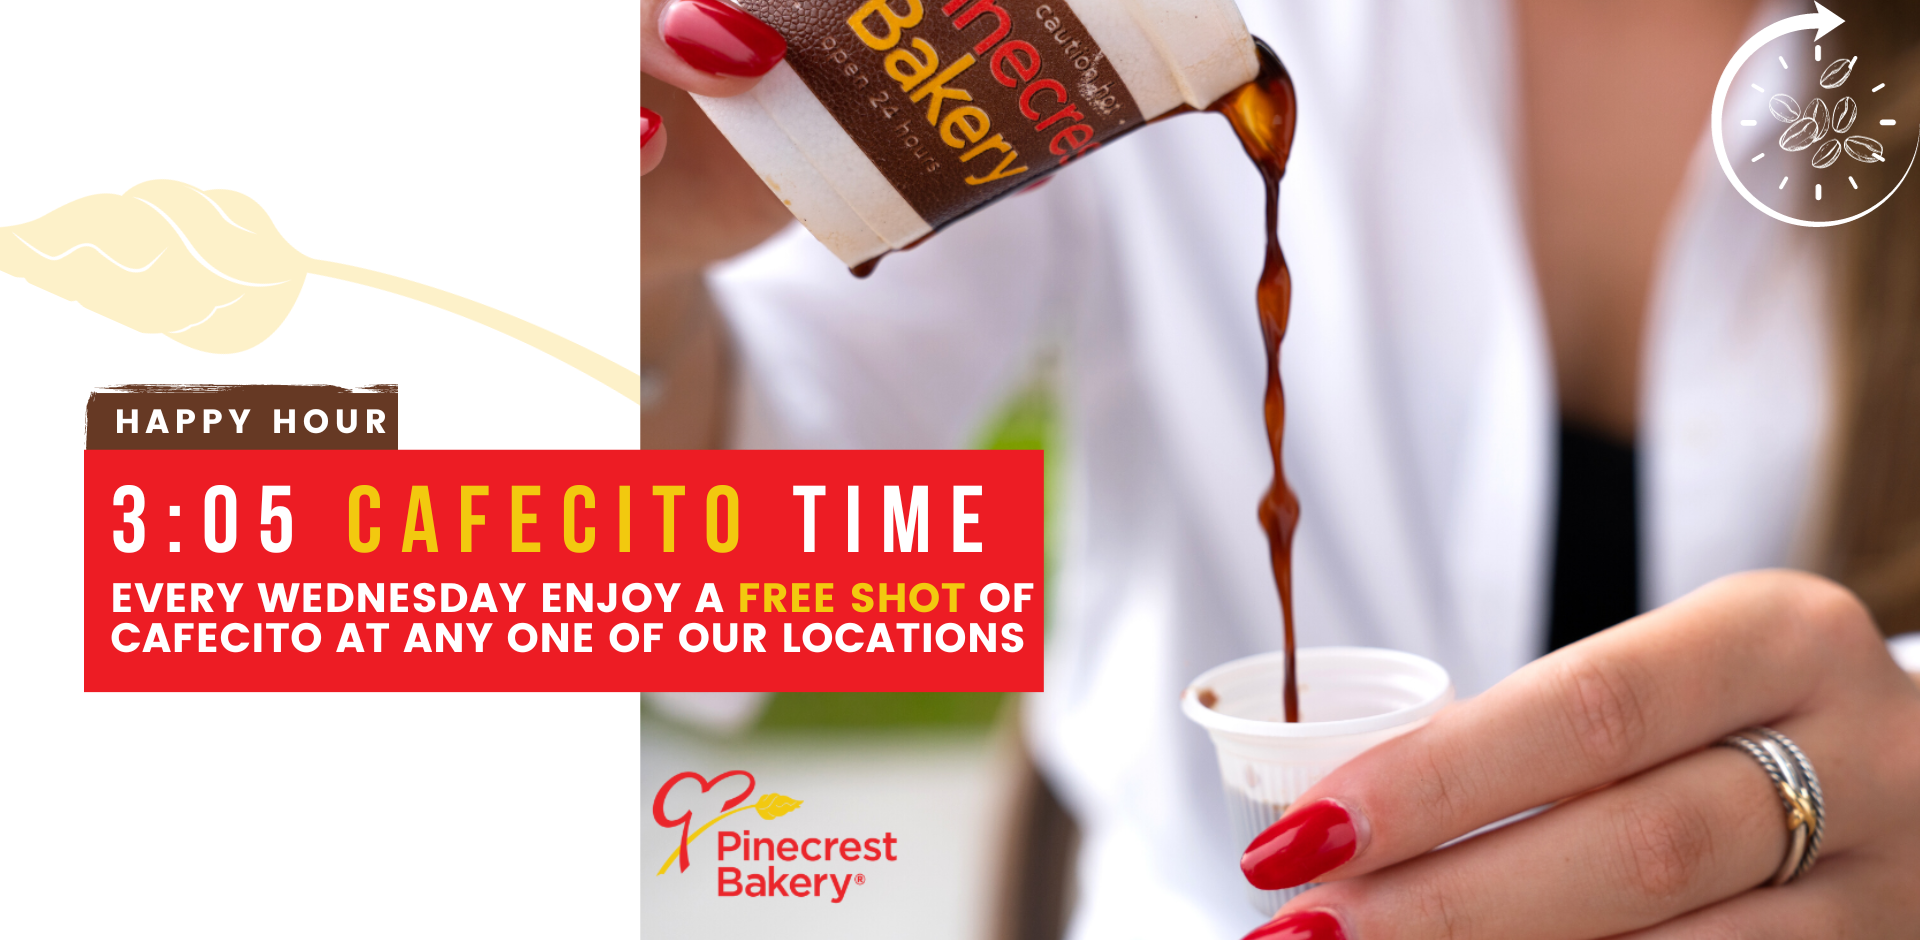 HAPPY HOUR. 3:05 Cafecito time. Every Wednesday enjoy a free shot of cafecito at any one of our locations